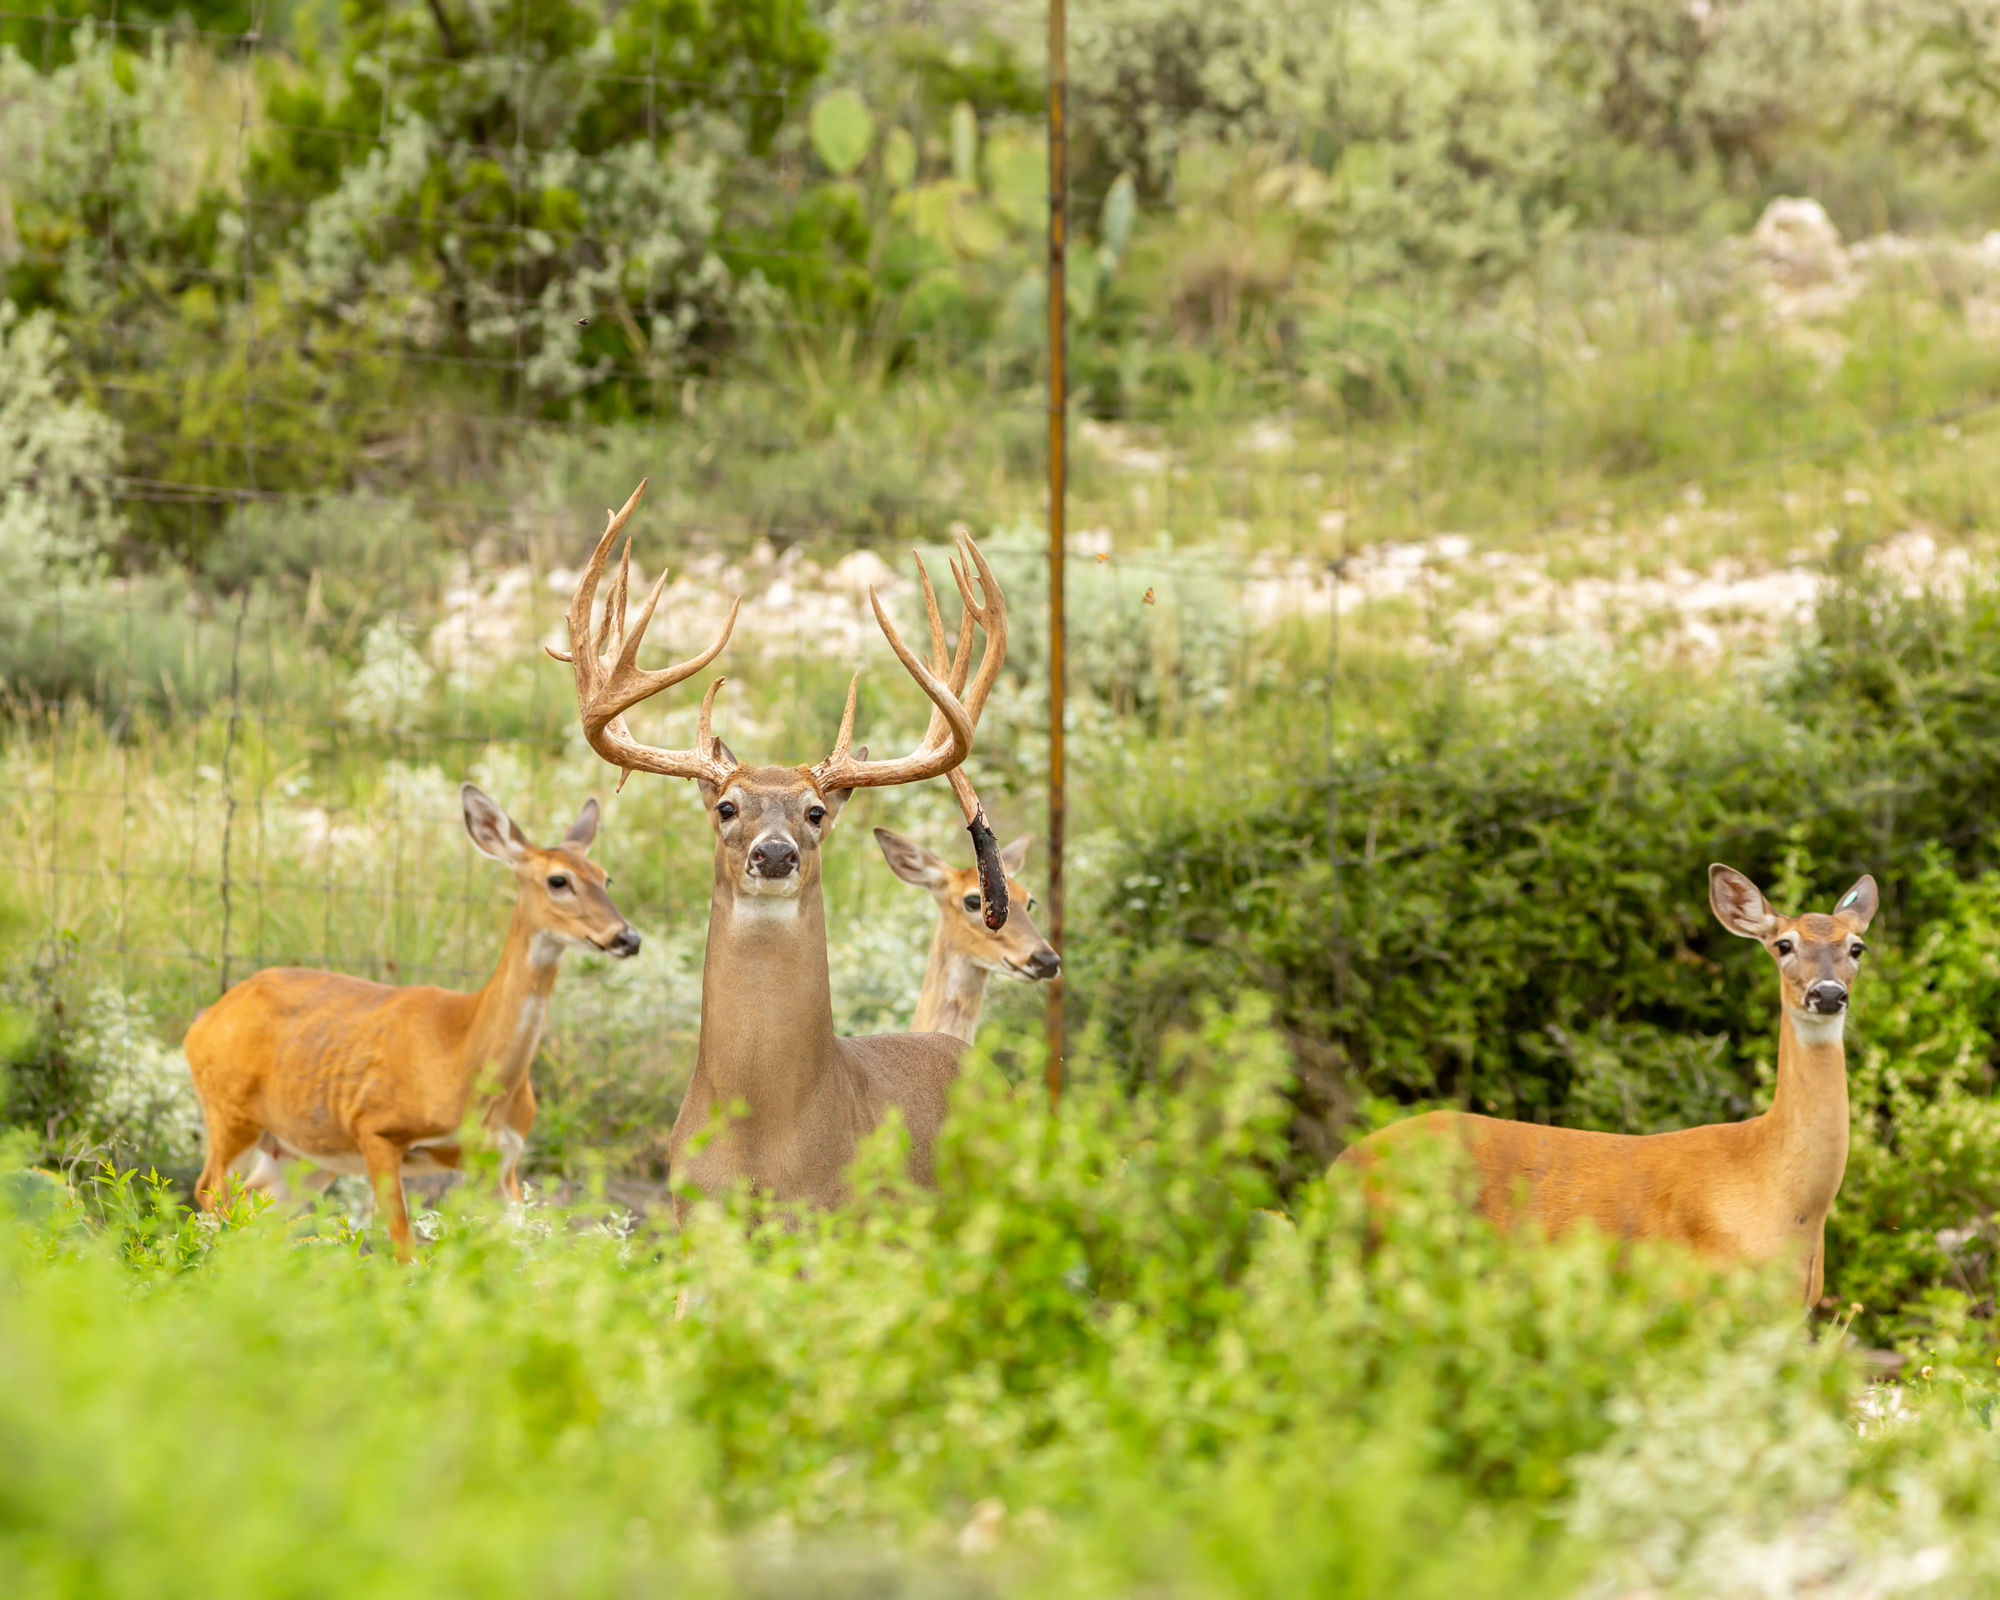 Captive deer pose threats to wild deer, but they may also hold some clues to CWD resistance.